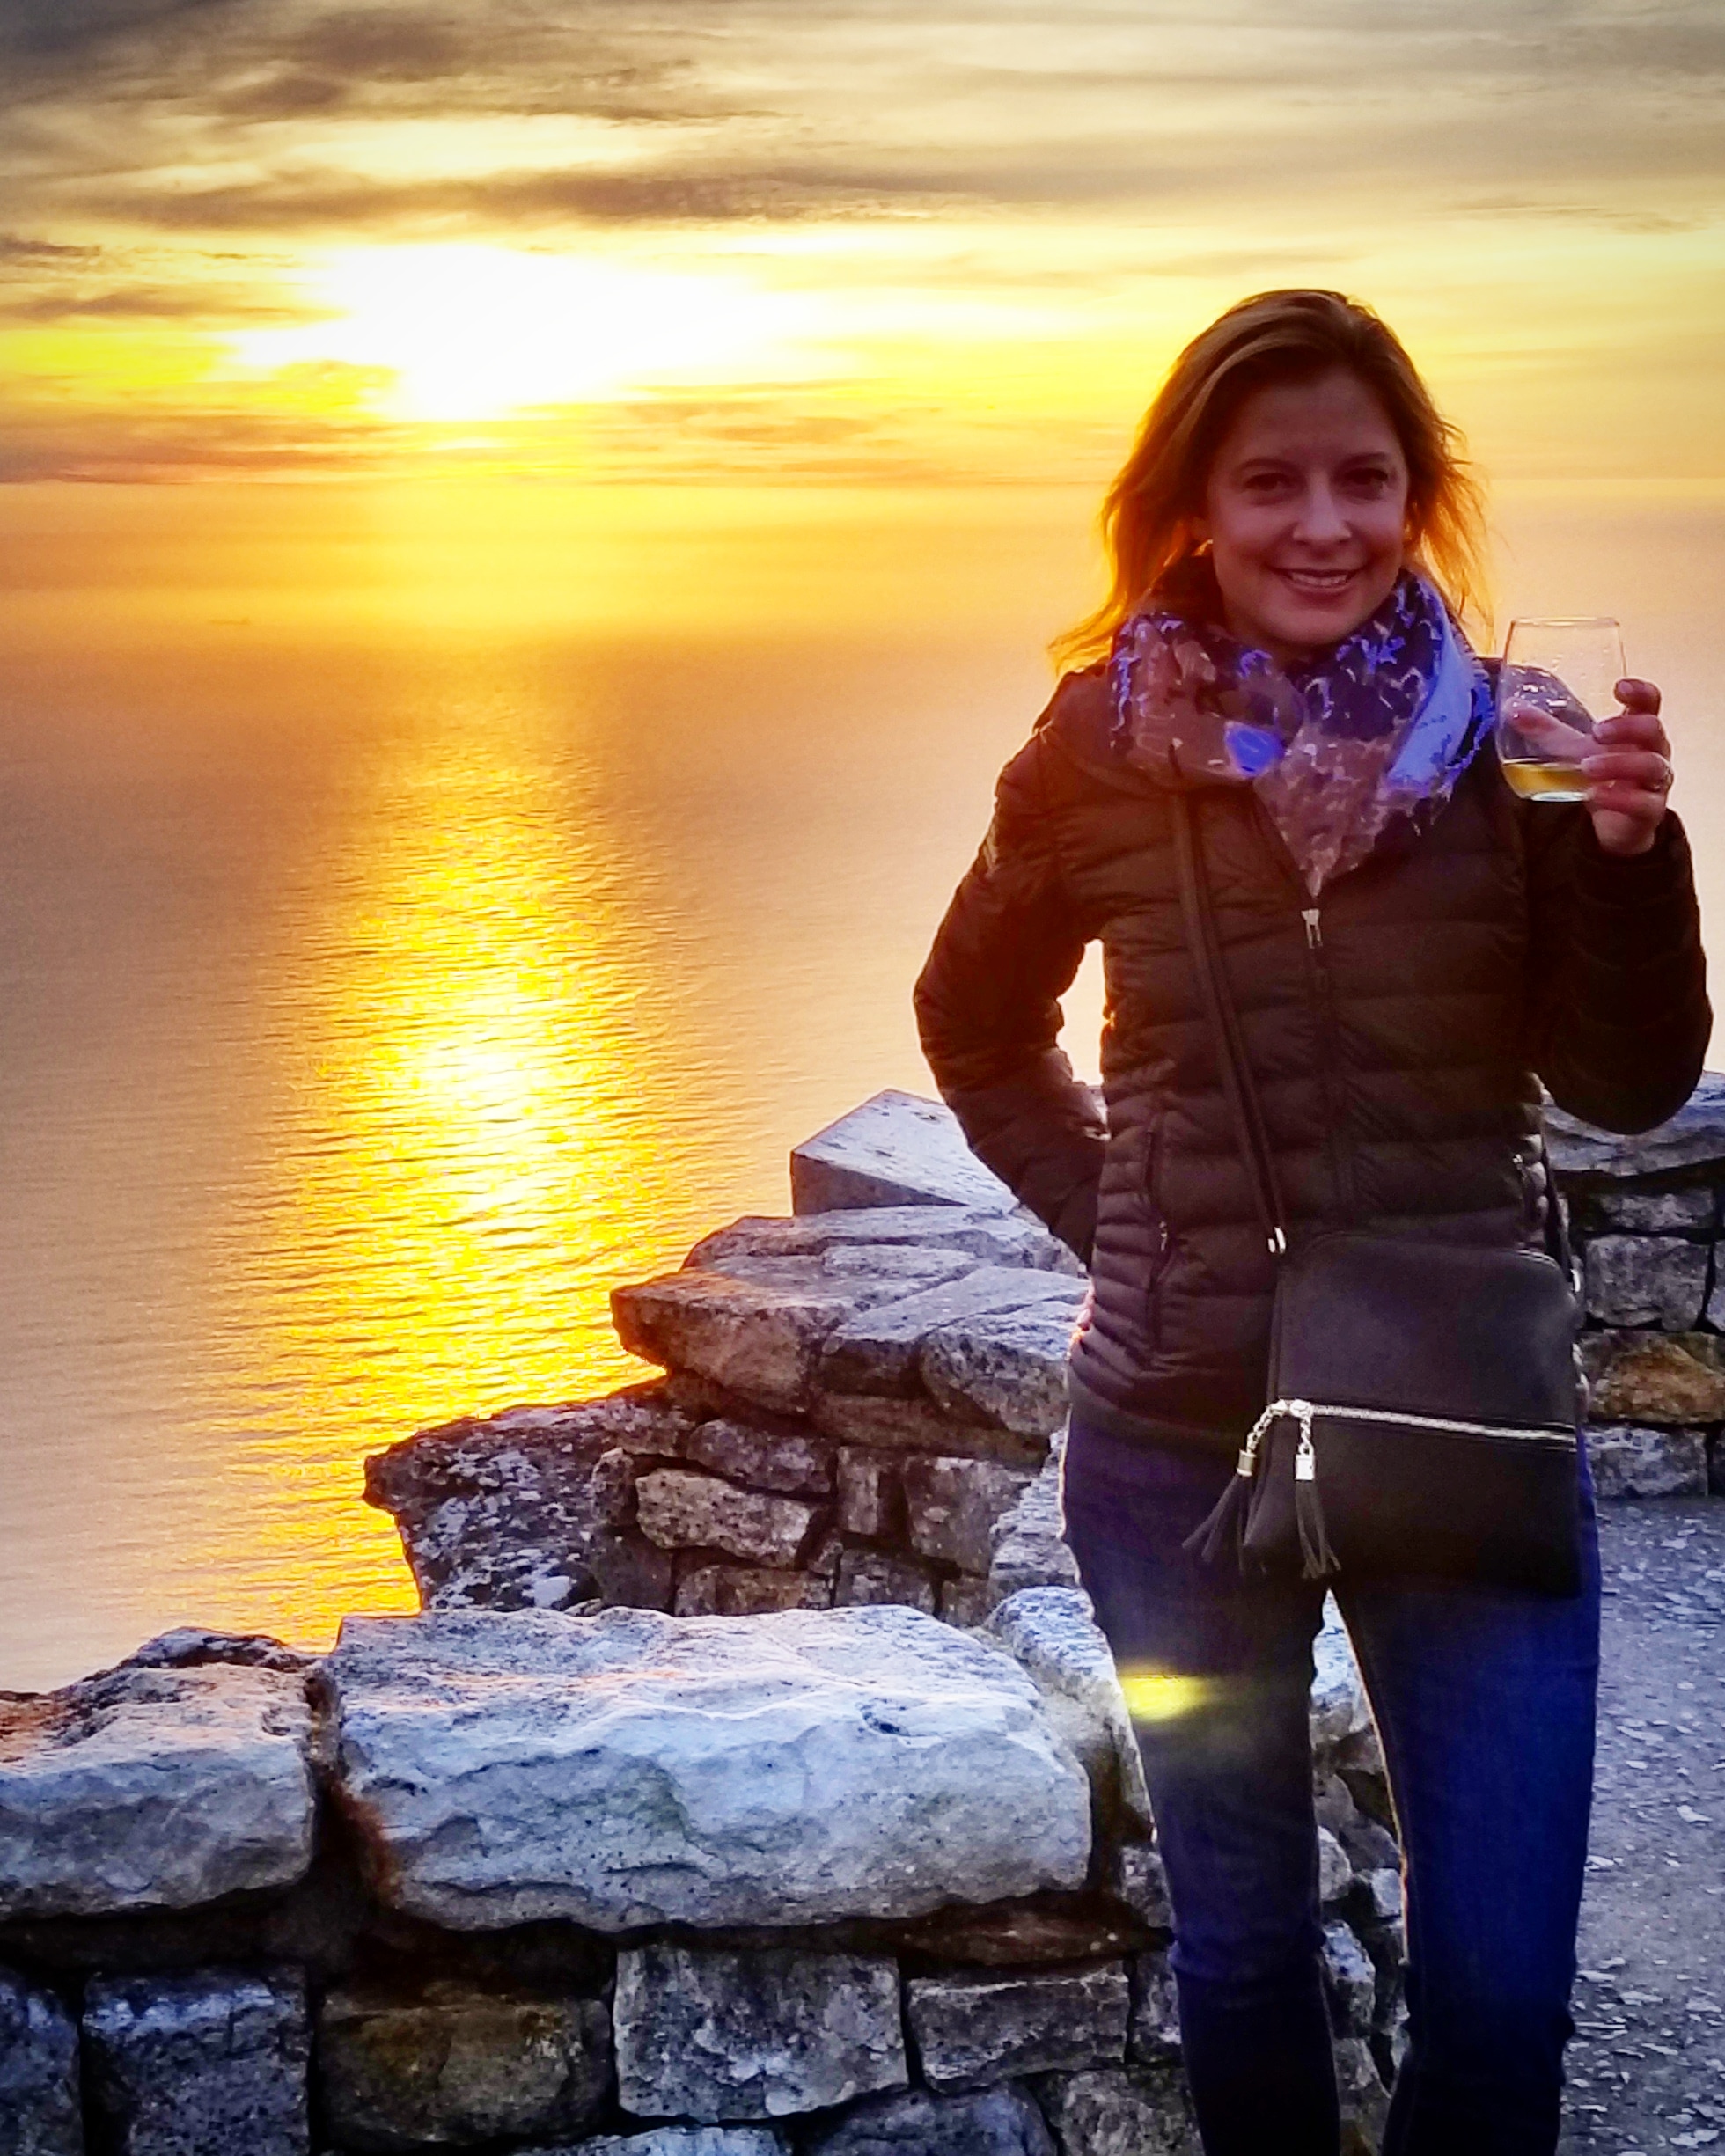 Toasting the sunset with Methode Cap Classique at the top of Table Mountain in Cape Town, South Africa.